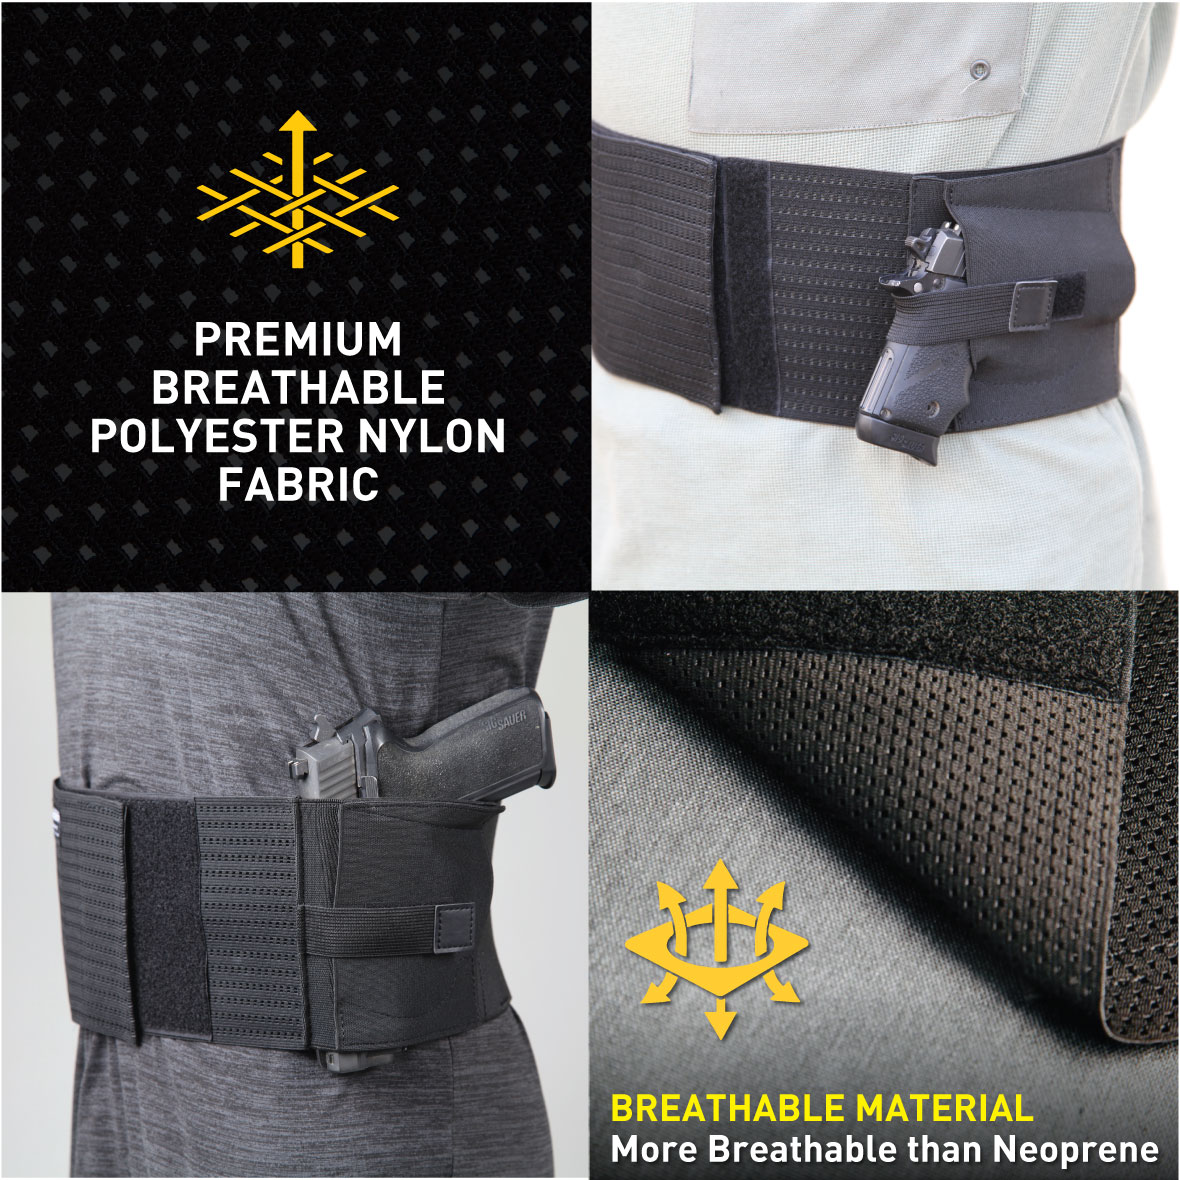 Stinger Premium Ultra Breathable Chest Band Holster for Concealed Carry, IWB OWB Gun Holster, Fabric Comfortable Waistband Handgun Holster, Ammo Bandolier for Extra Round of Revolver Bullet